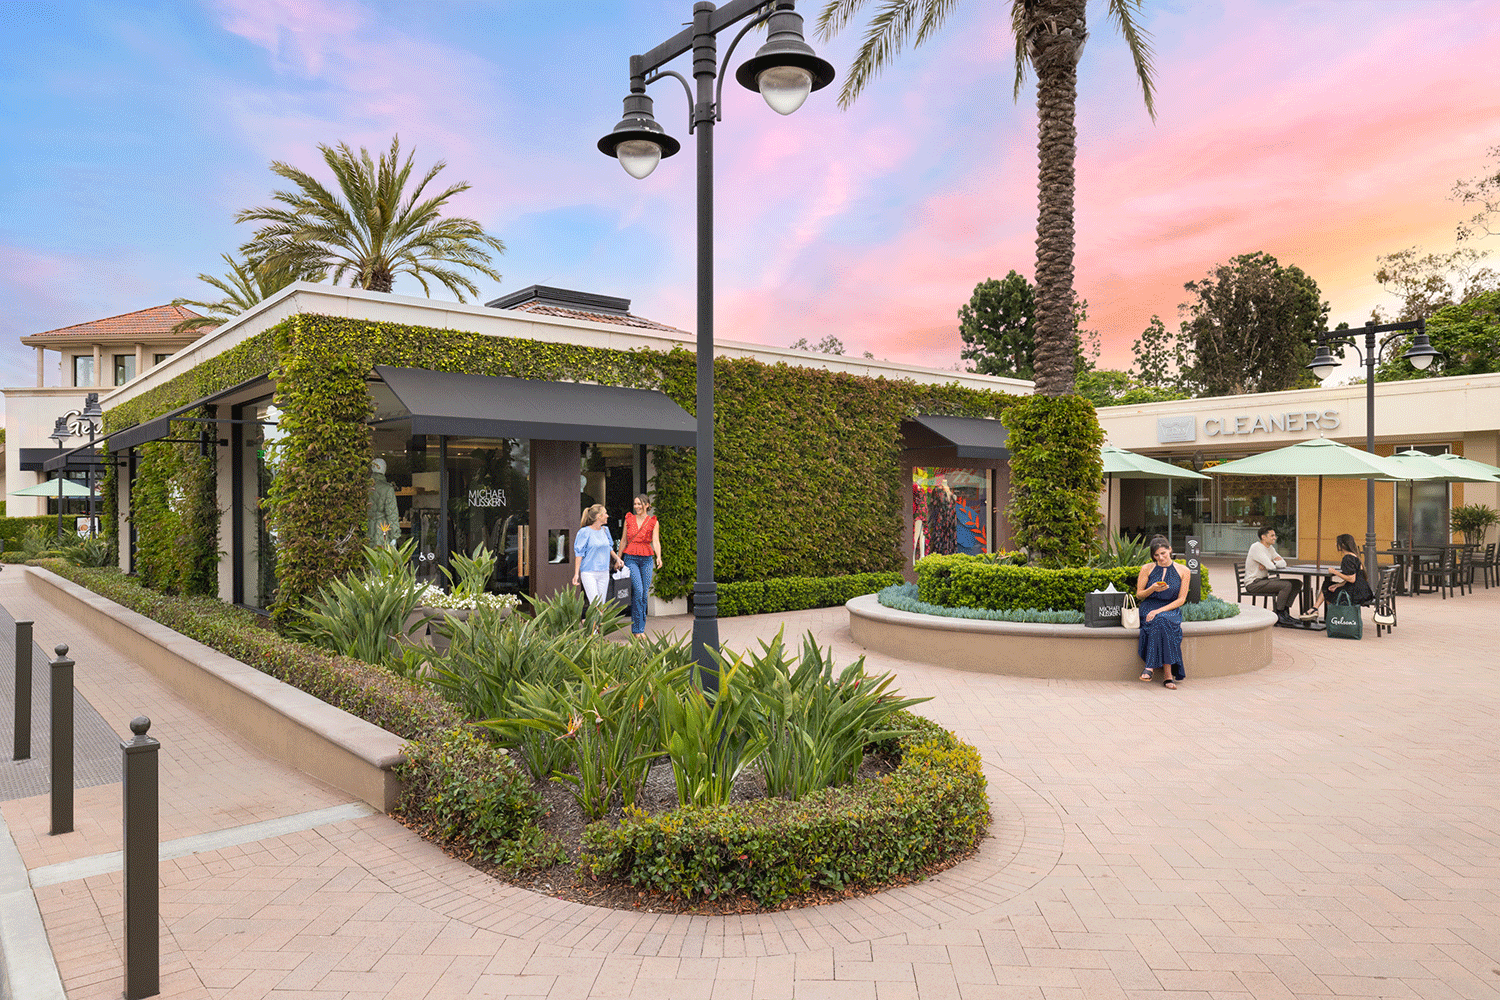  View of the courtyard at Harbor View Shopping Center 